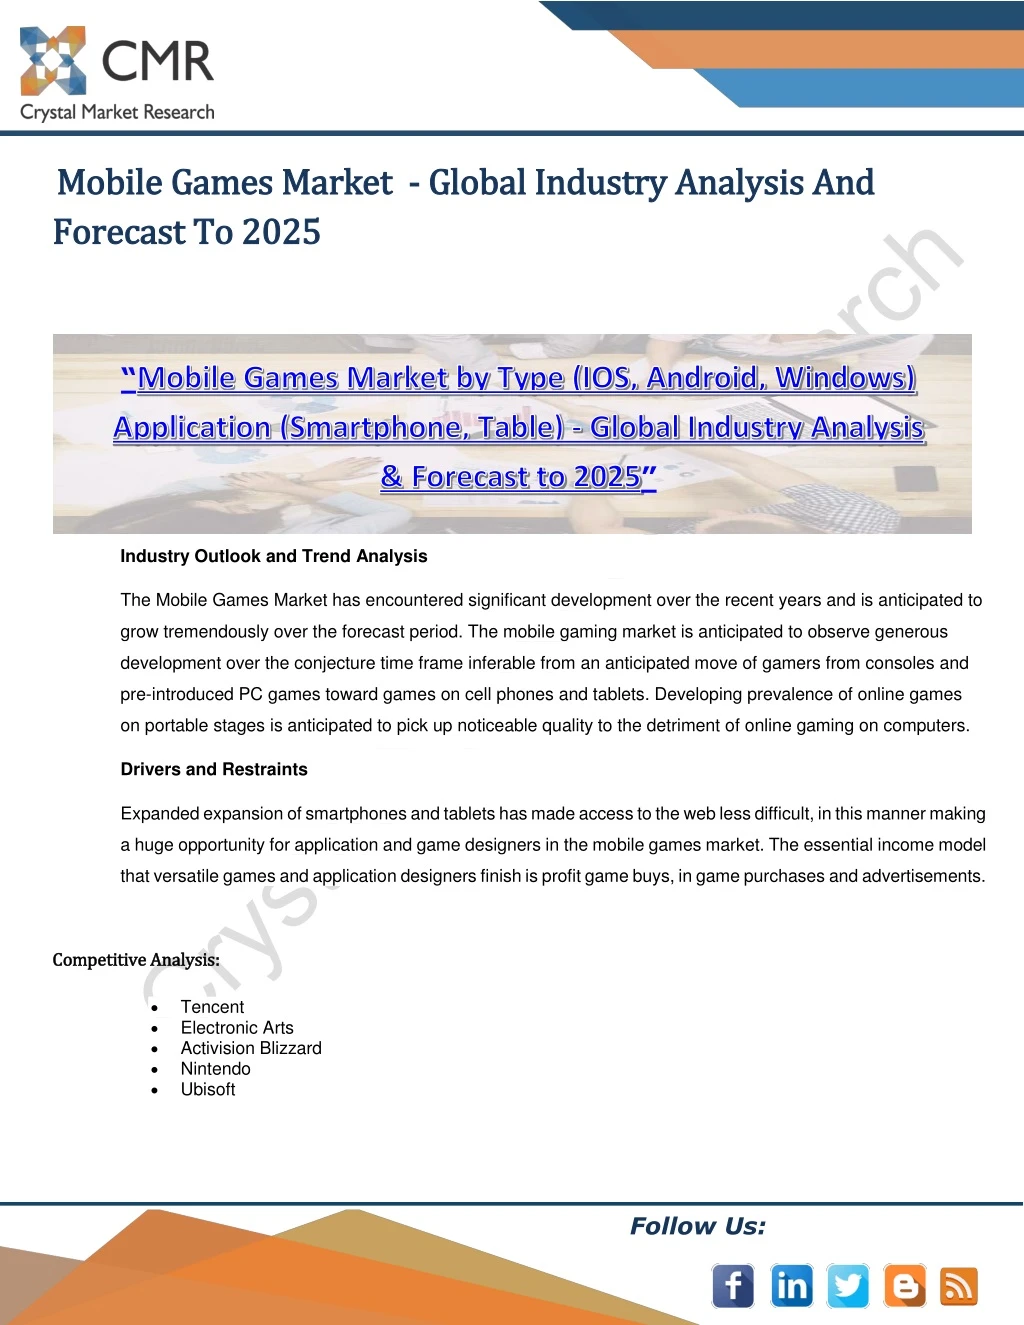 mobile games mobile games market forecast to 2025